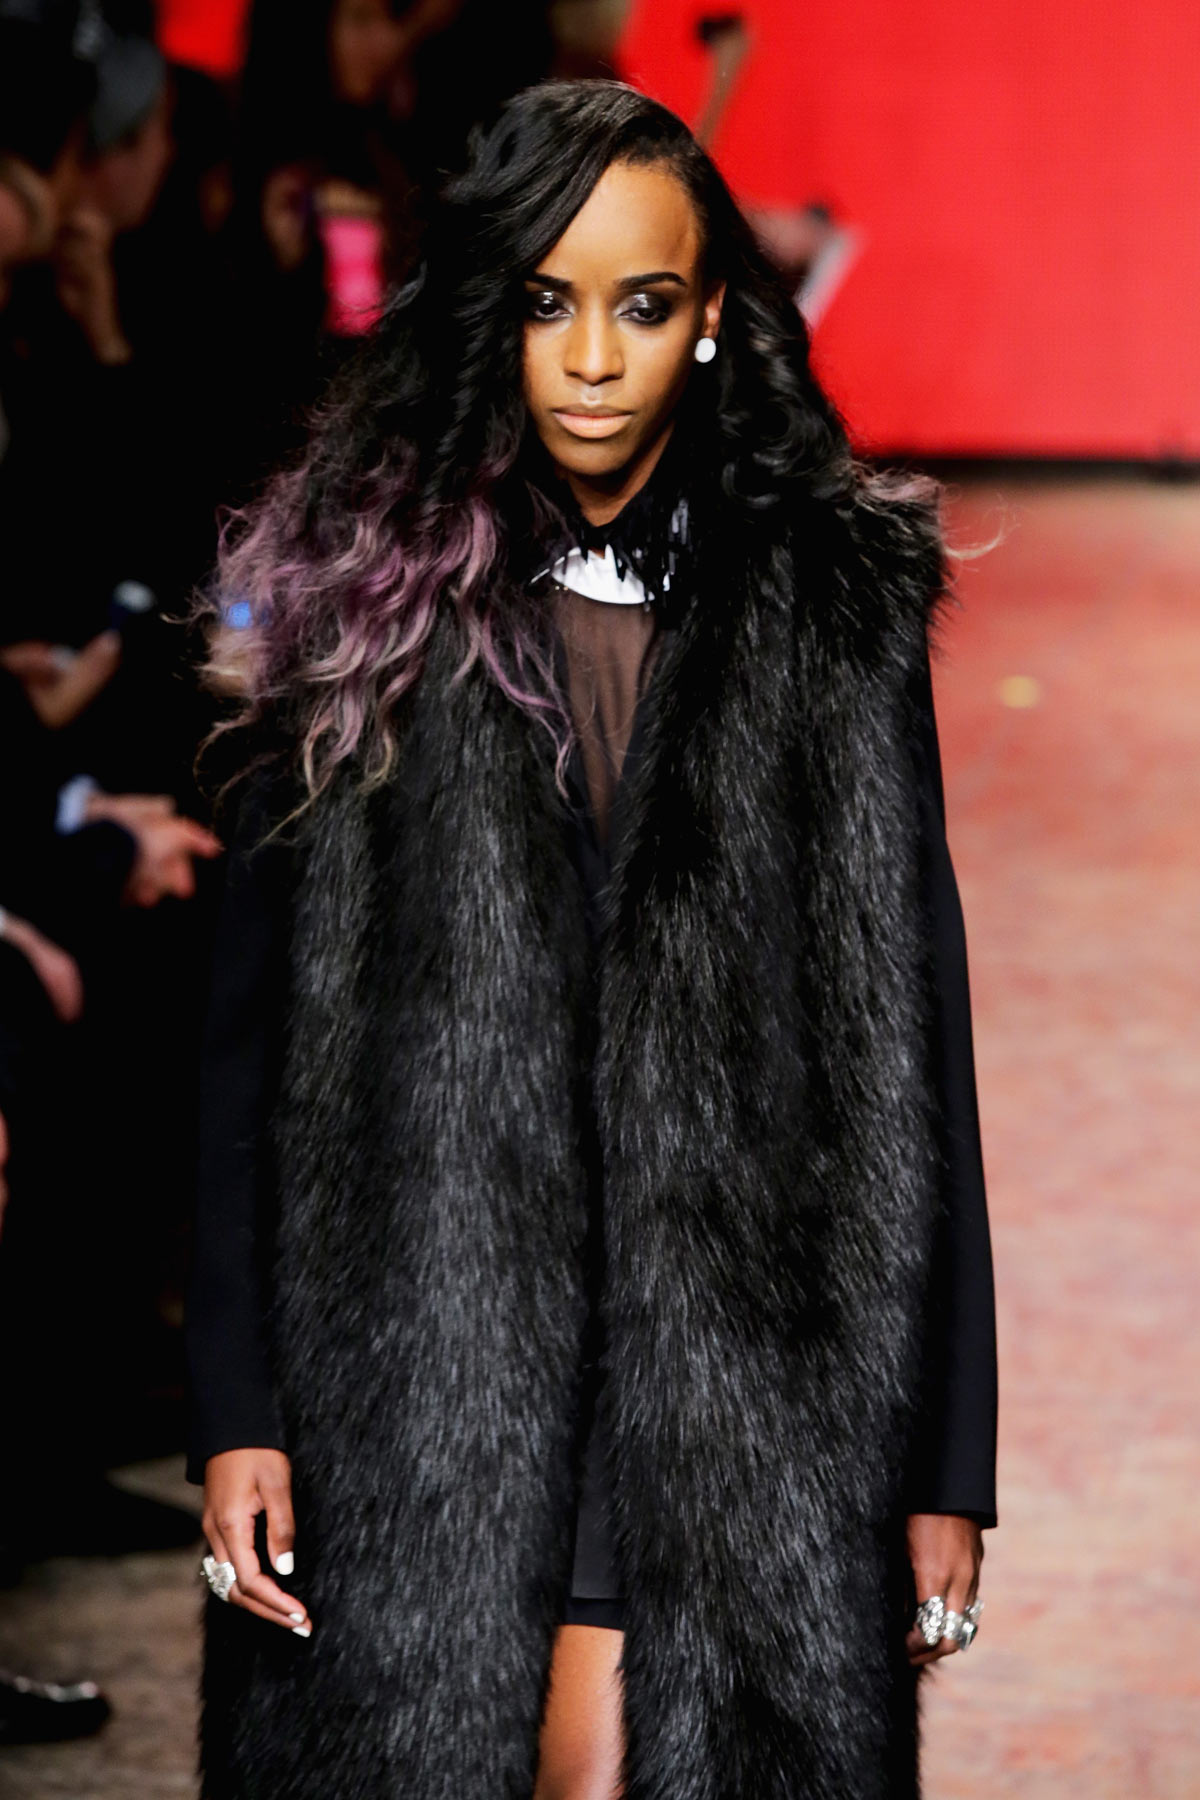 Musician Angel Haze walks the runway at the DKNY Women's fashion show during Mercedes-Benz Fashion Week Fall 2014 on February 9, 2014 in New York City.